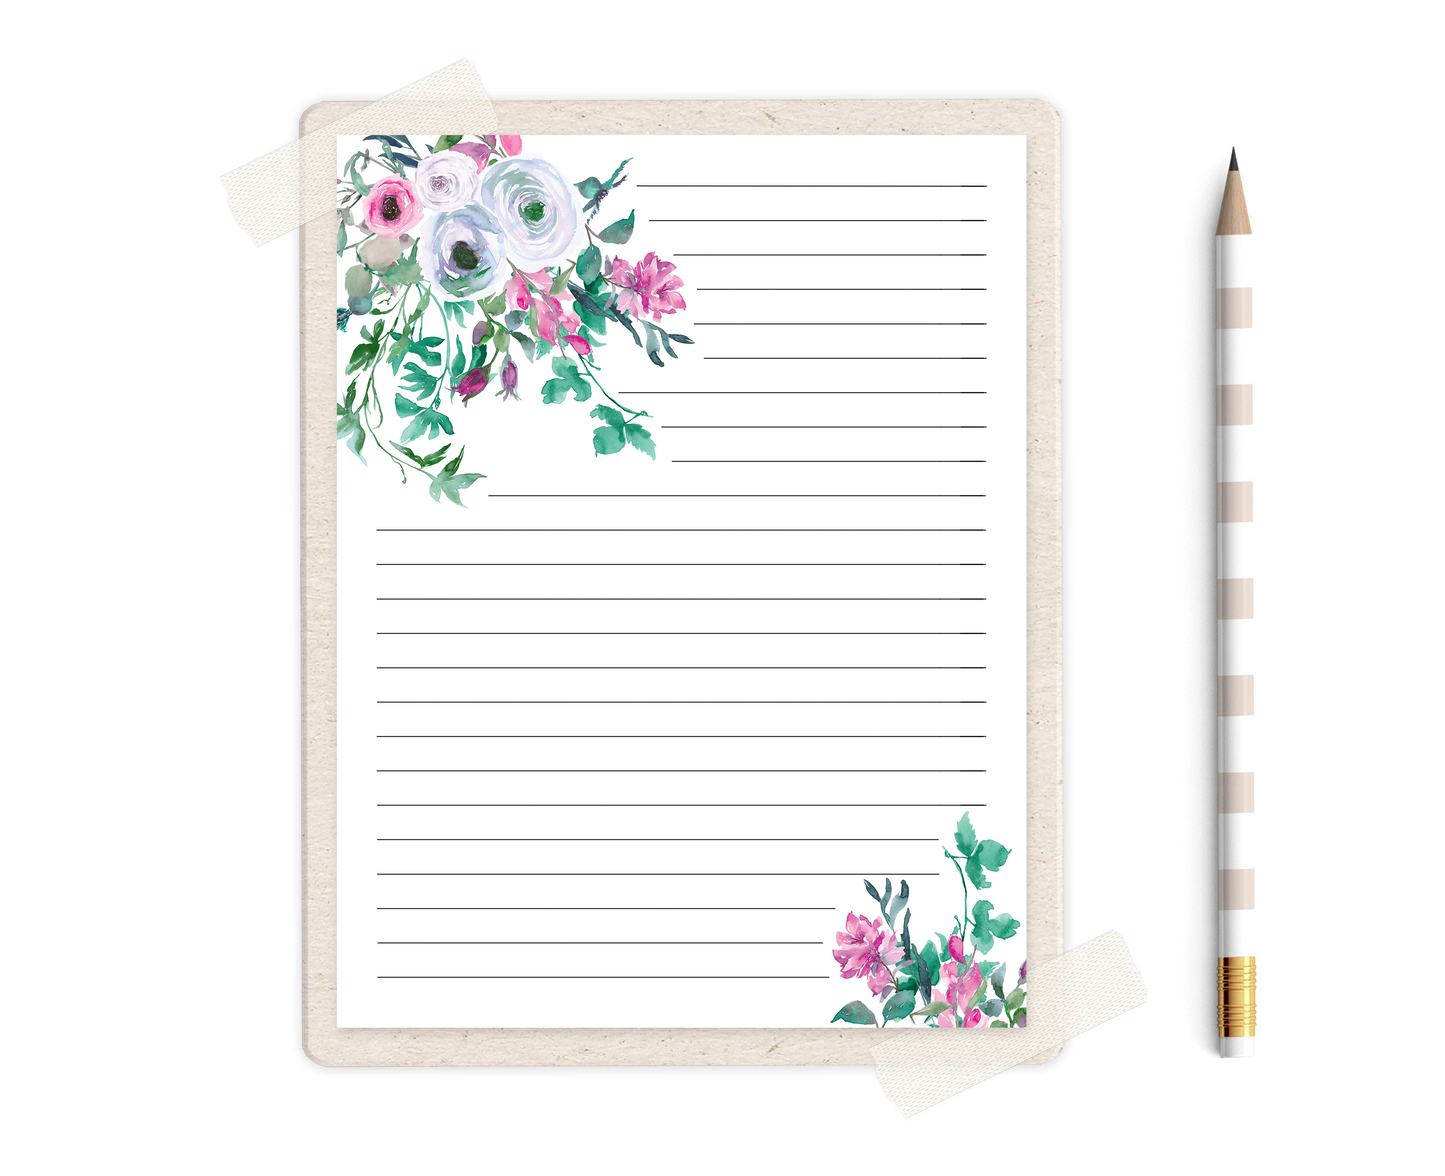 Floral Pink and Green Watercolor Stationery Set Printable - Digital Download